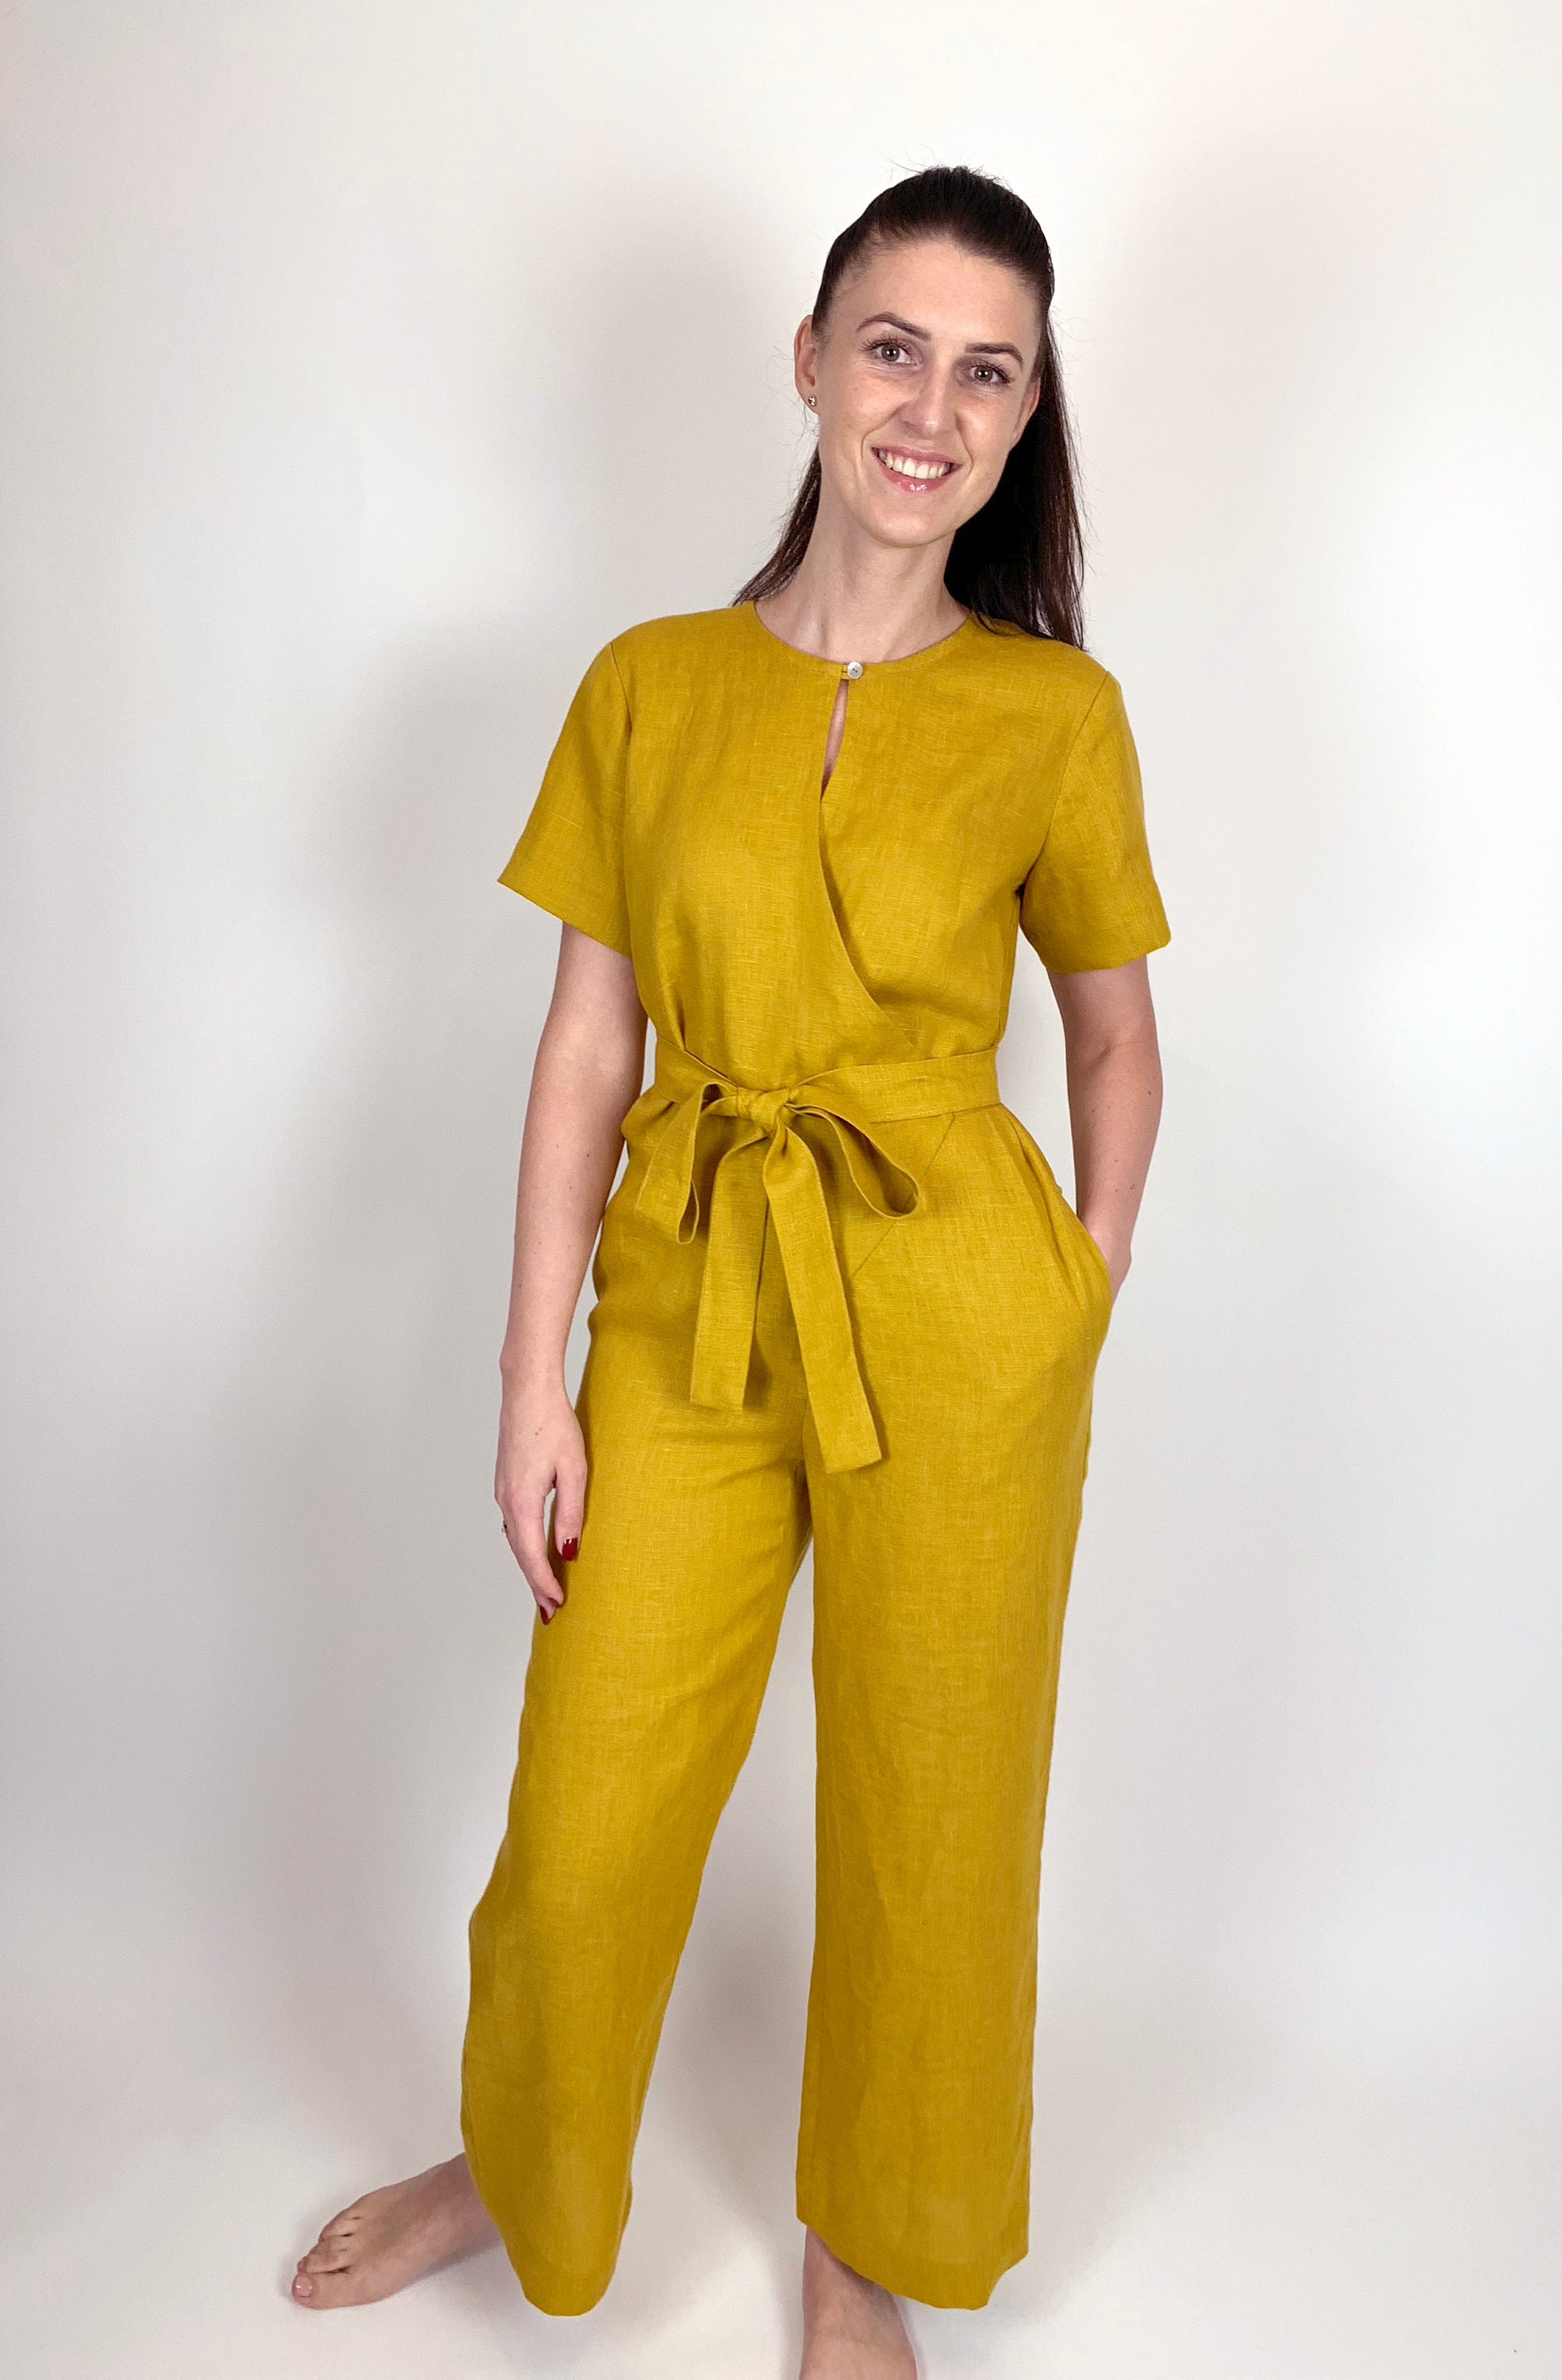 Wrap Linen Mustard Yellow Jumpsuit With Short Sleeves Long - Etsy